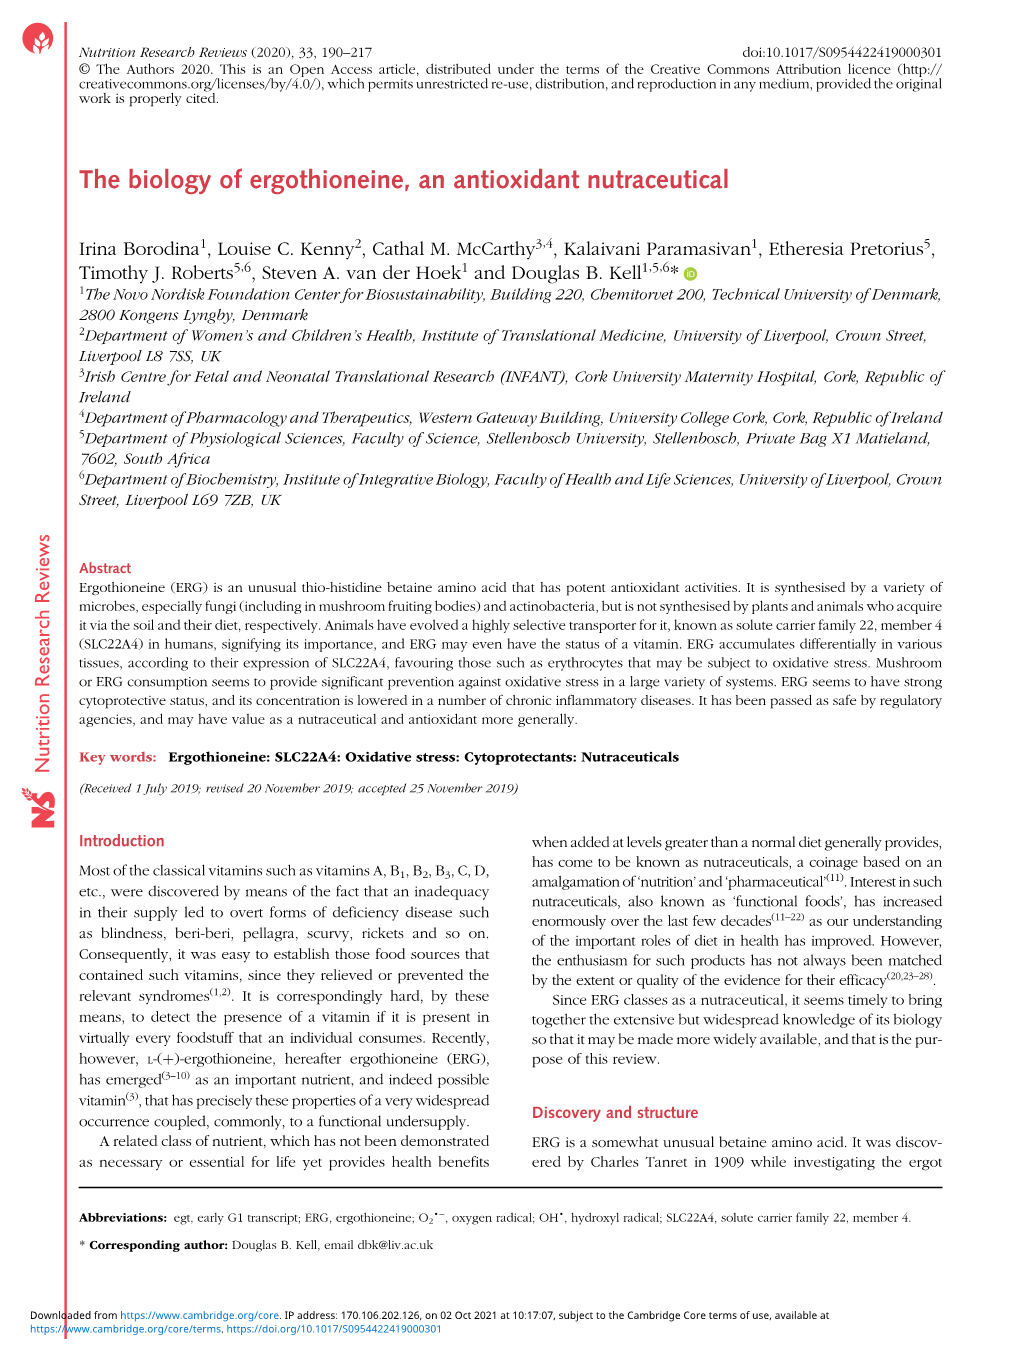 The Biology of Ergothioneine, an Antioxidant Nutraceutical